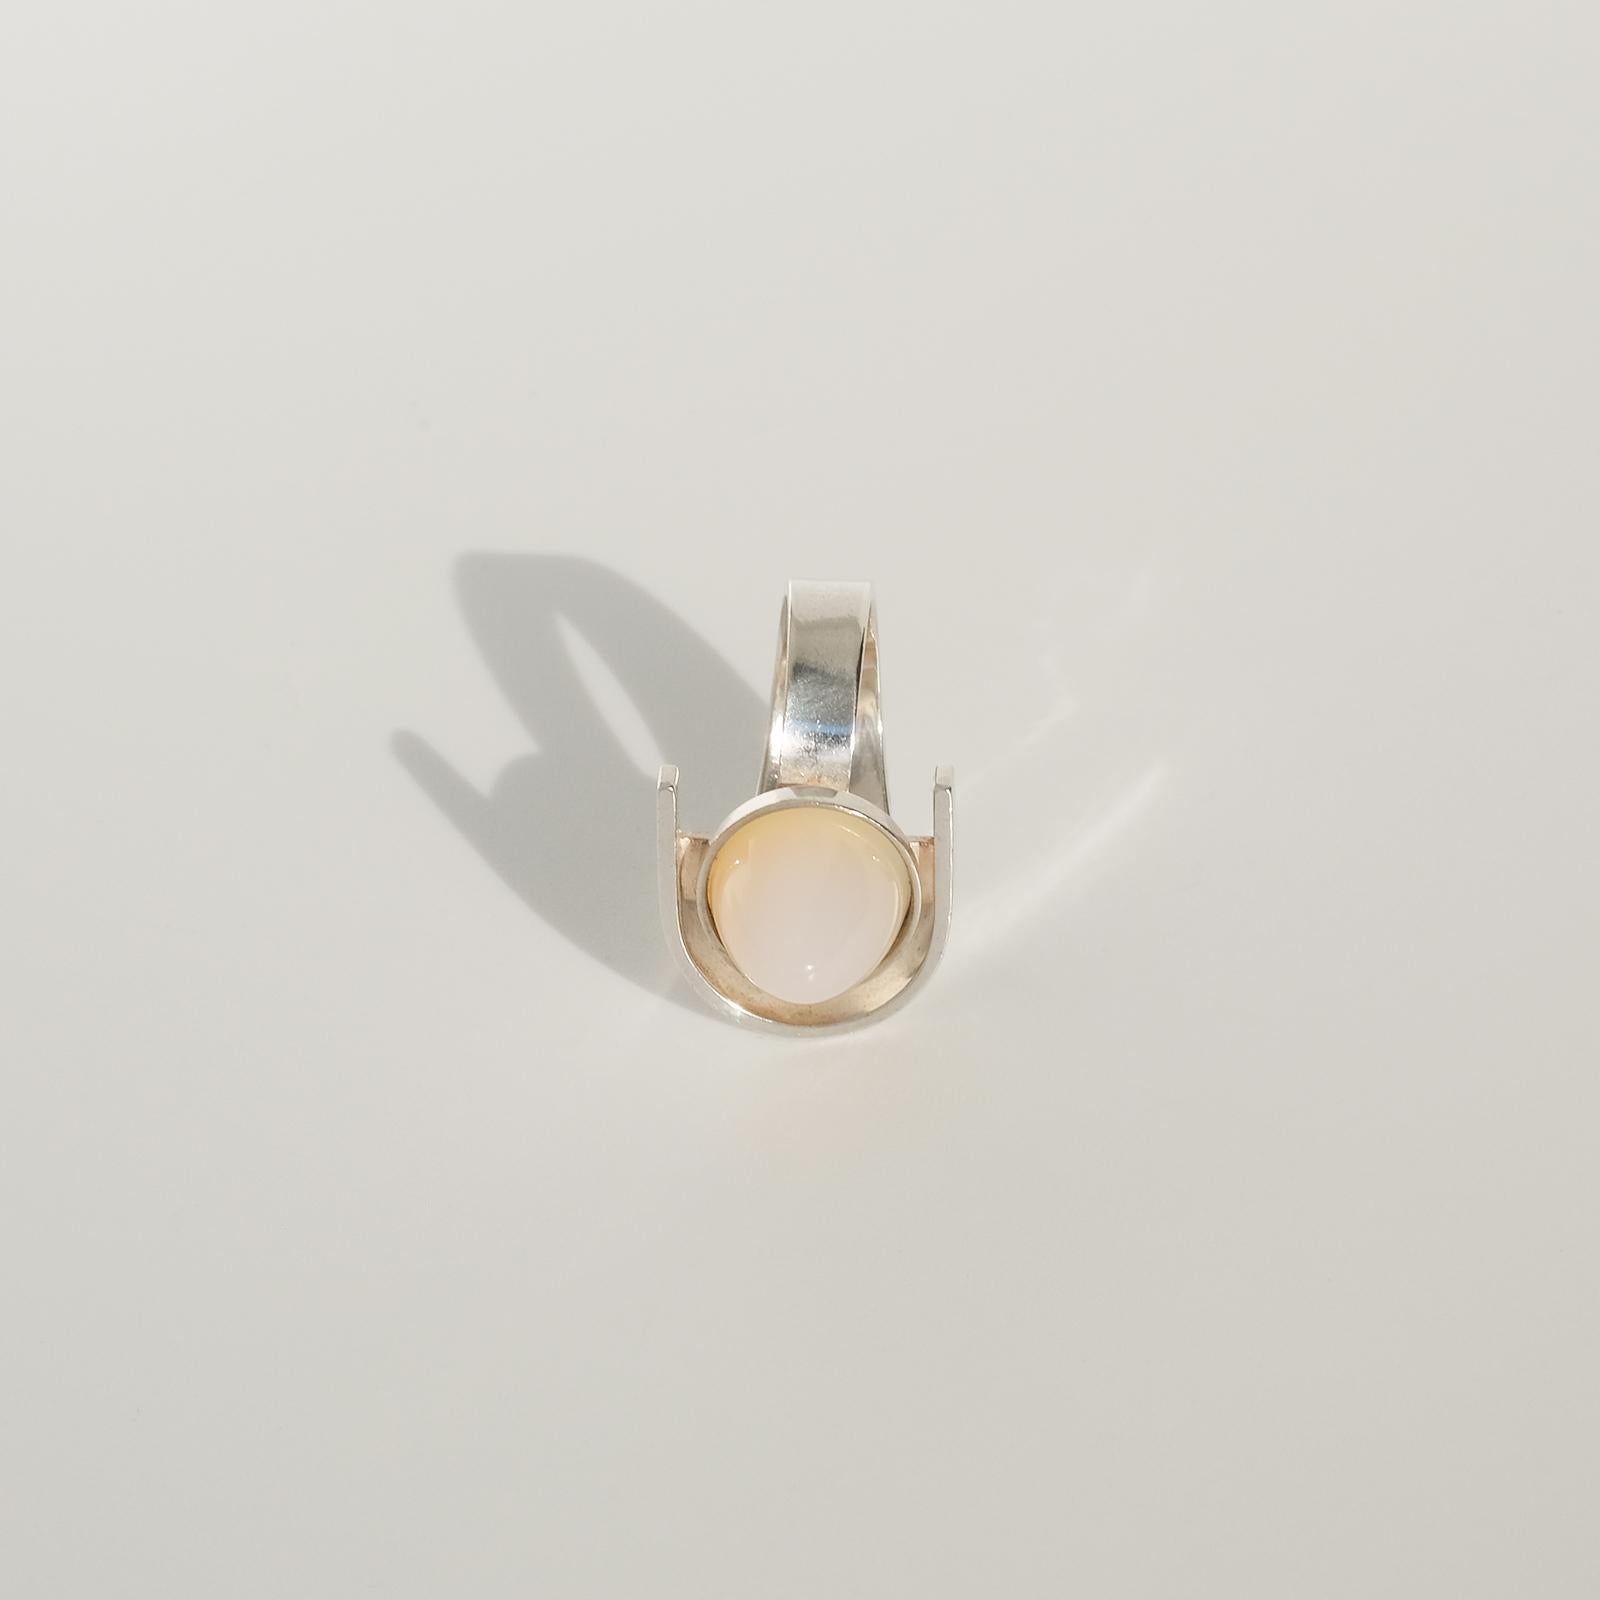 Women's Modernistic Finnish Silver Ring with a Moonstone, 1960s